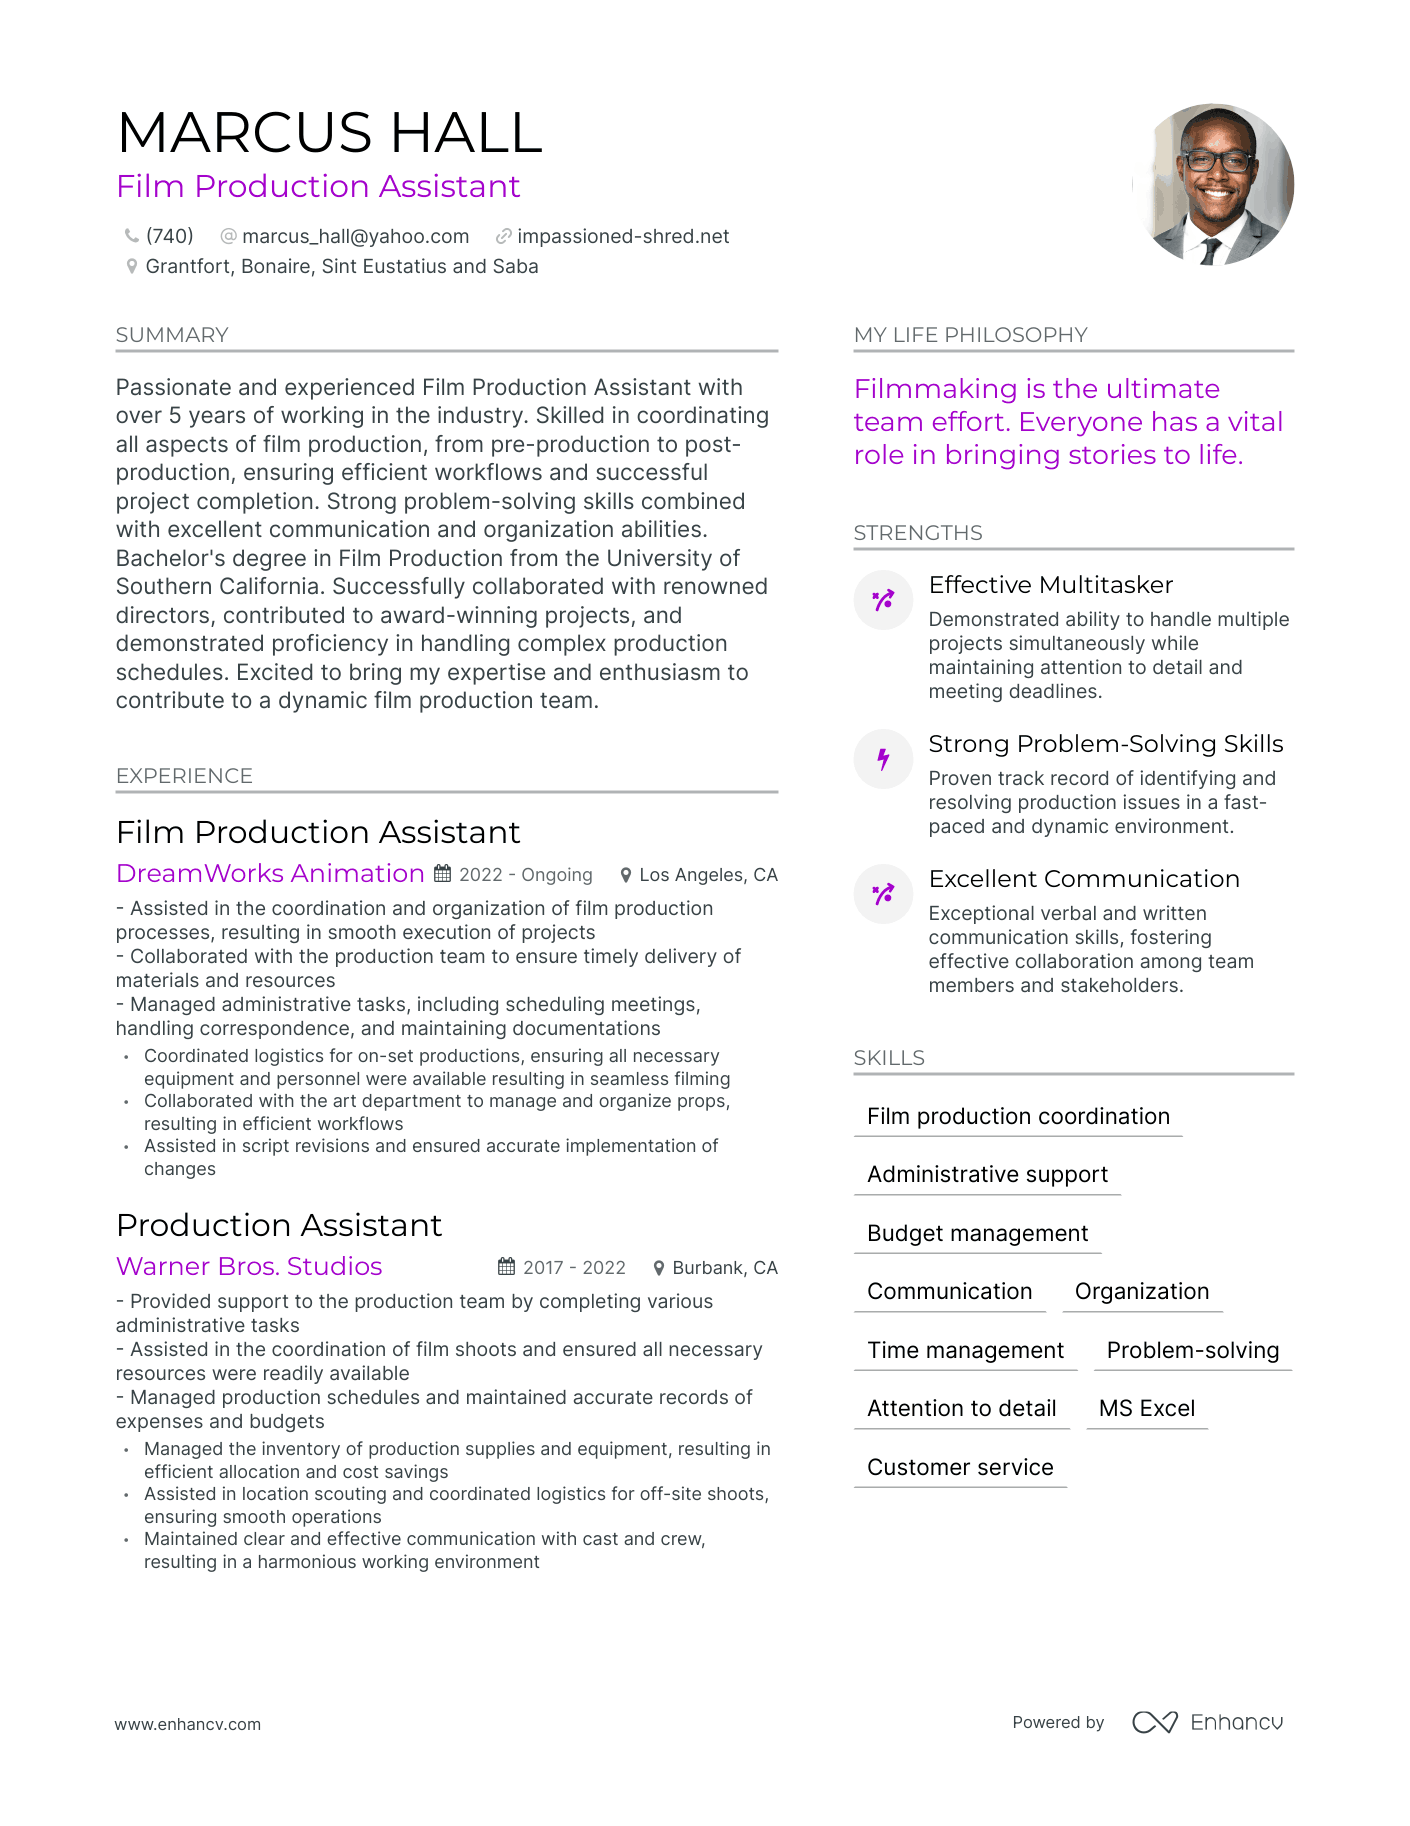 Film Production Assistant resume example